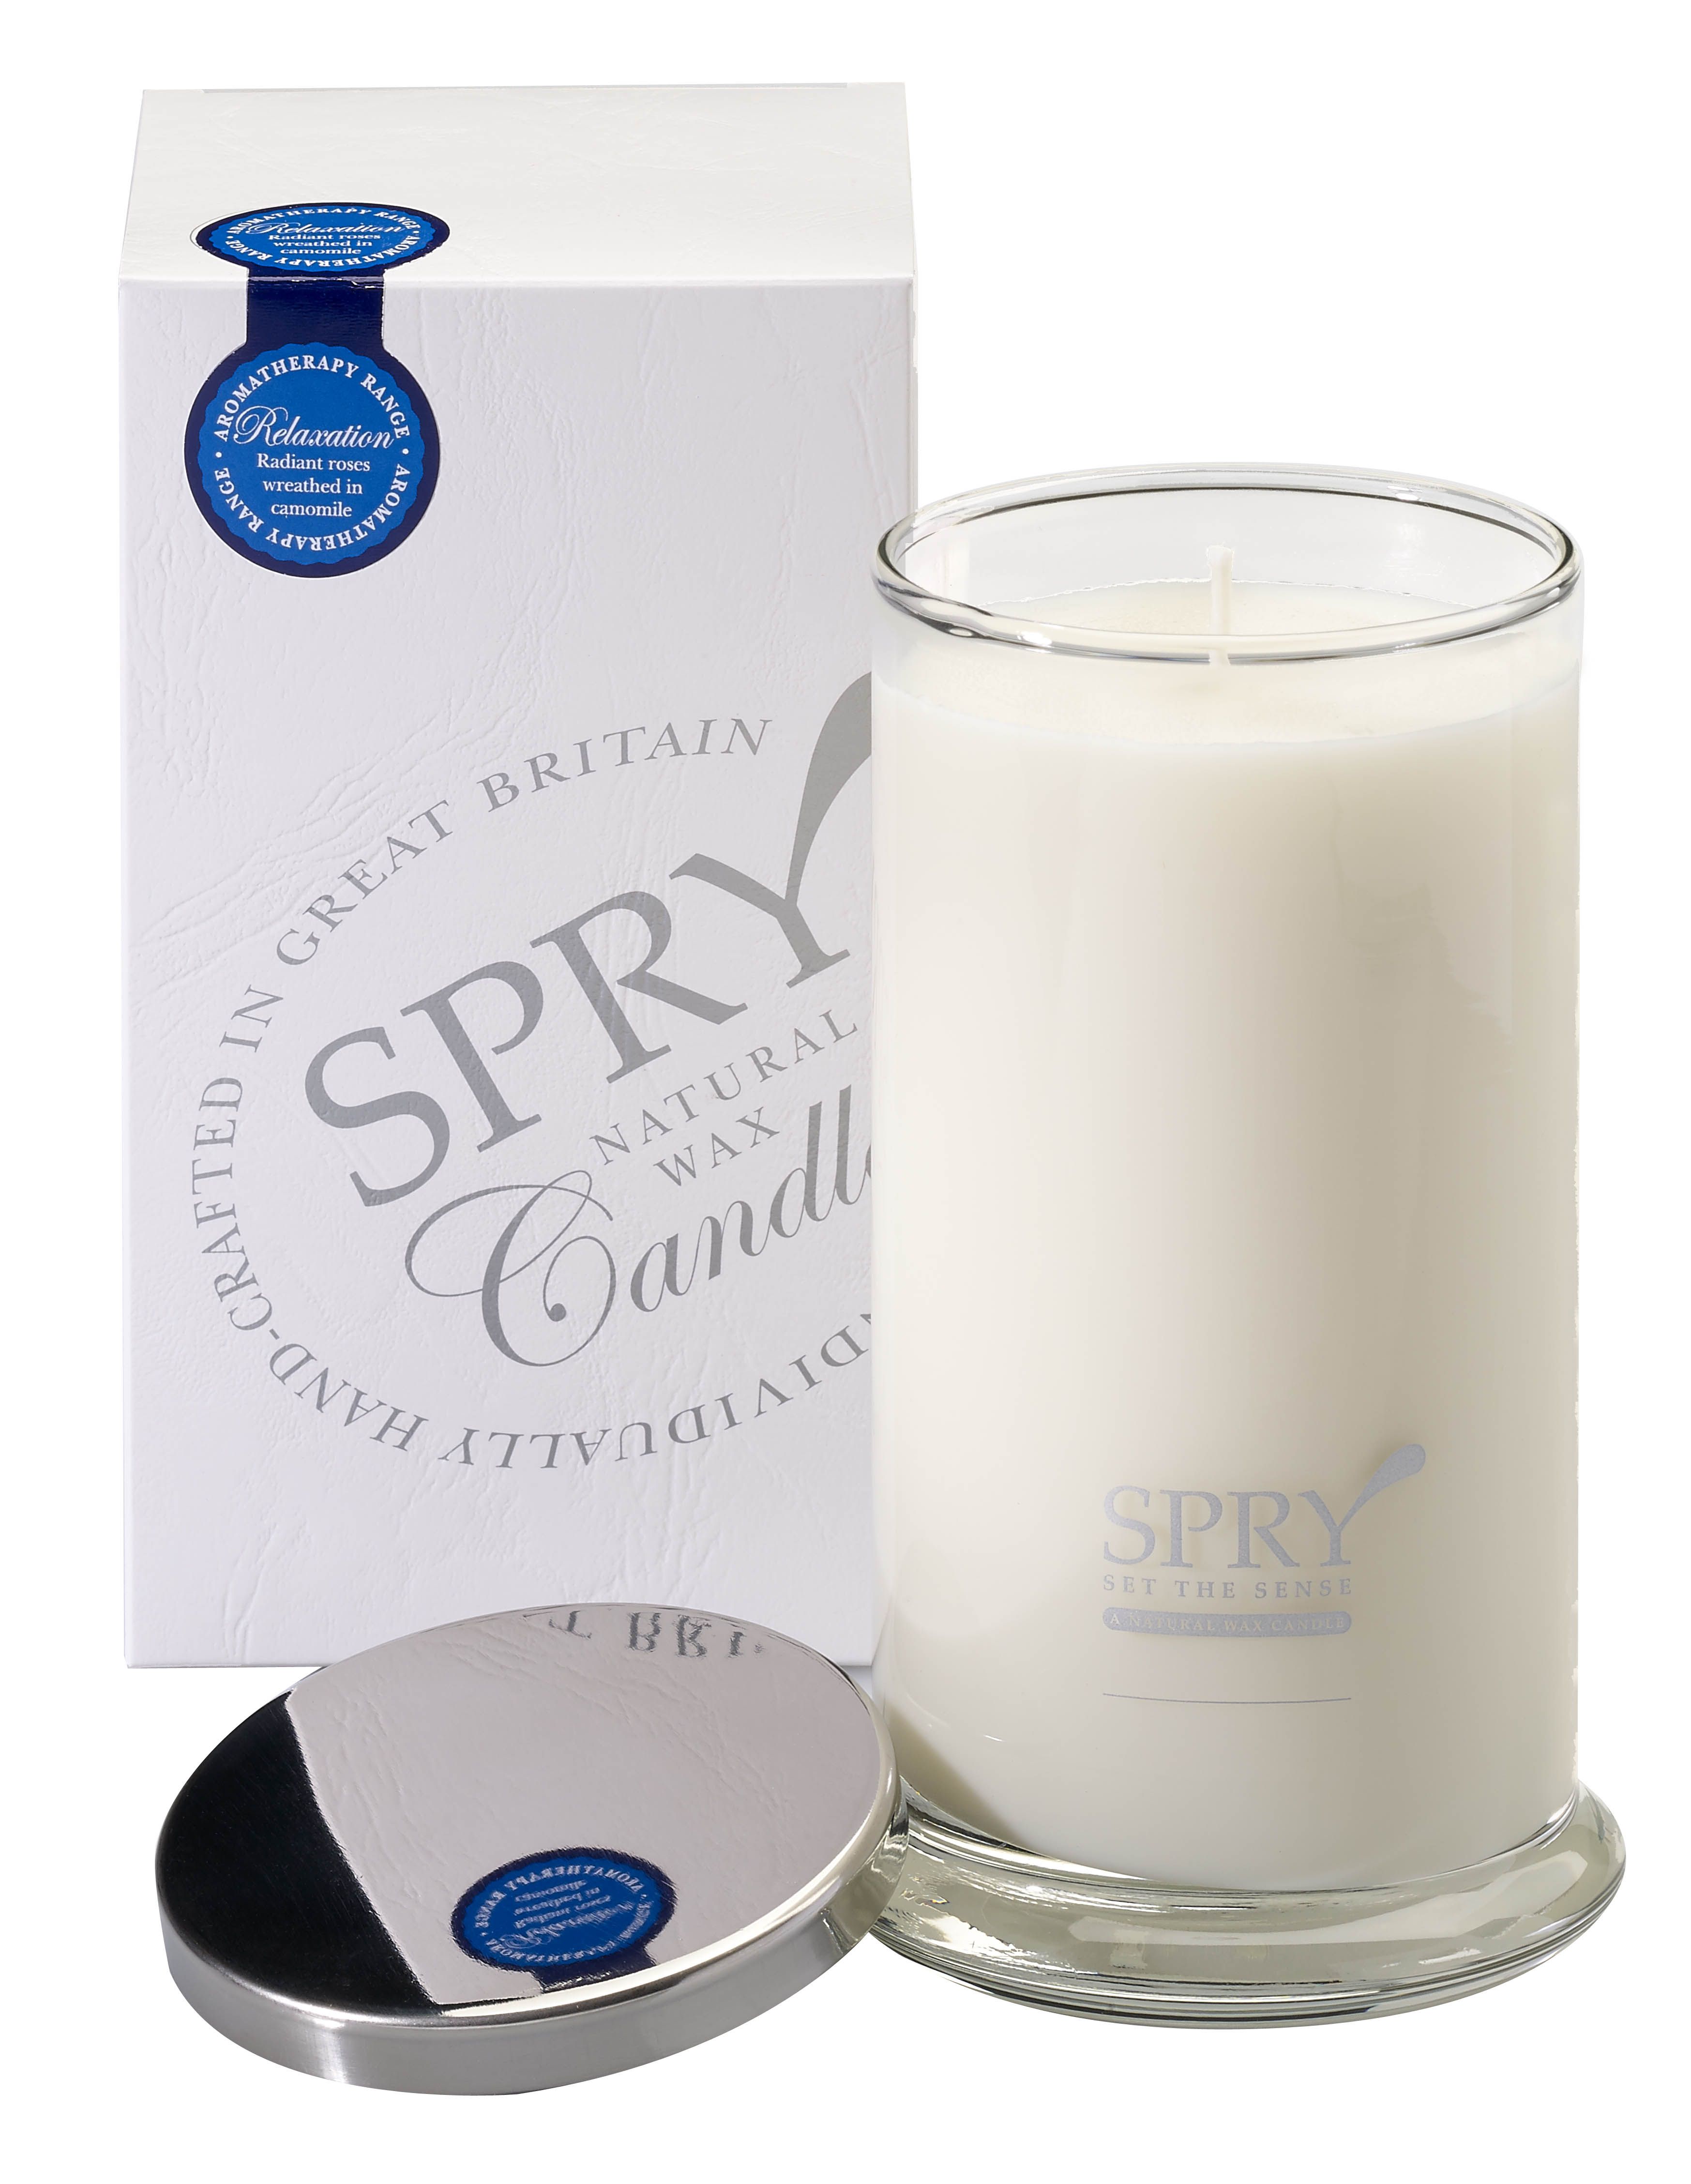 Spry Relaxation Large Candle